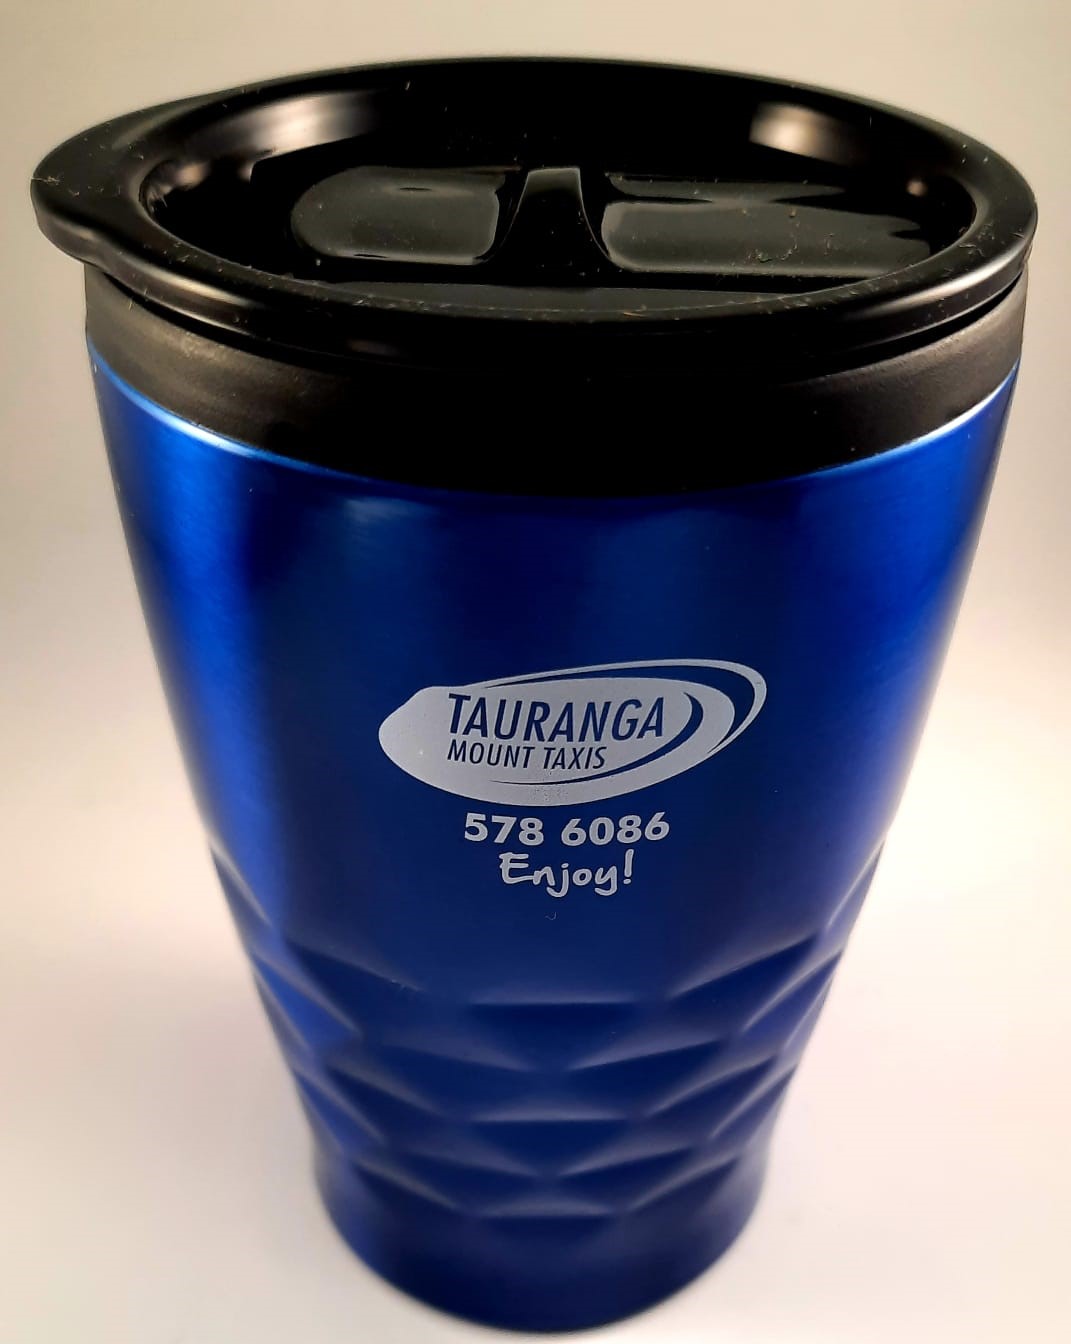 Tauranga Mount Taxis Branded Thermos Cups